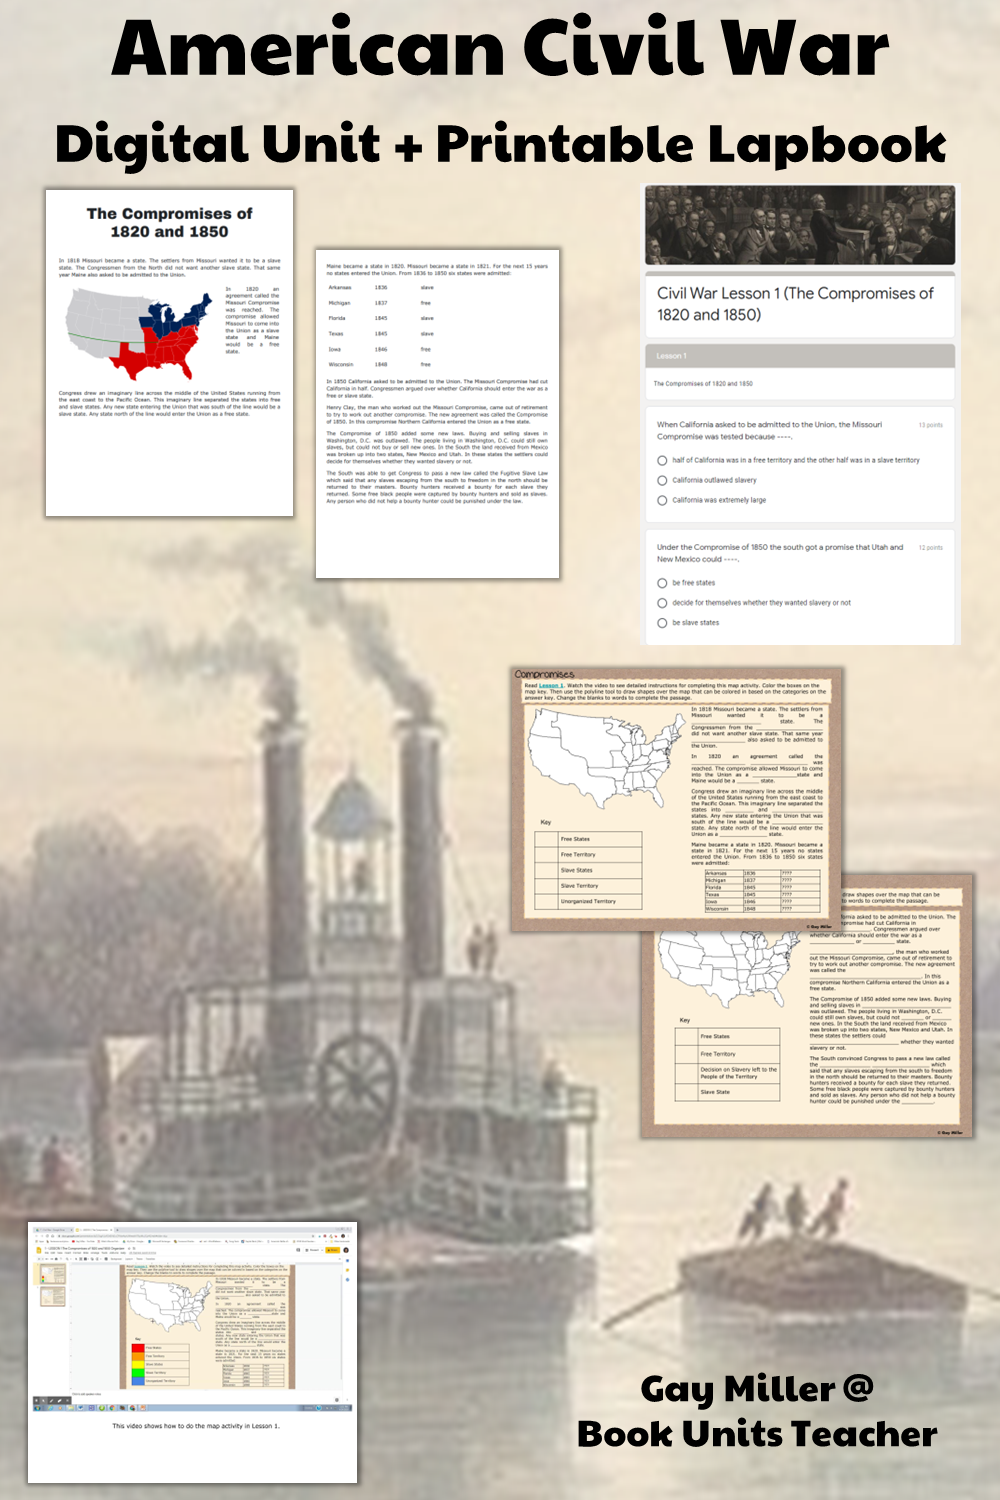 Purchase American Civil War Digital Unit on Teachers Pay Teachers. This activity is great for upper elementary including 4th, 5th, and 6th graders.